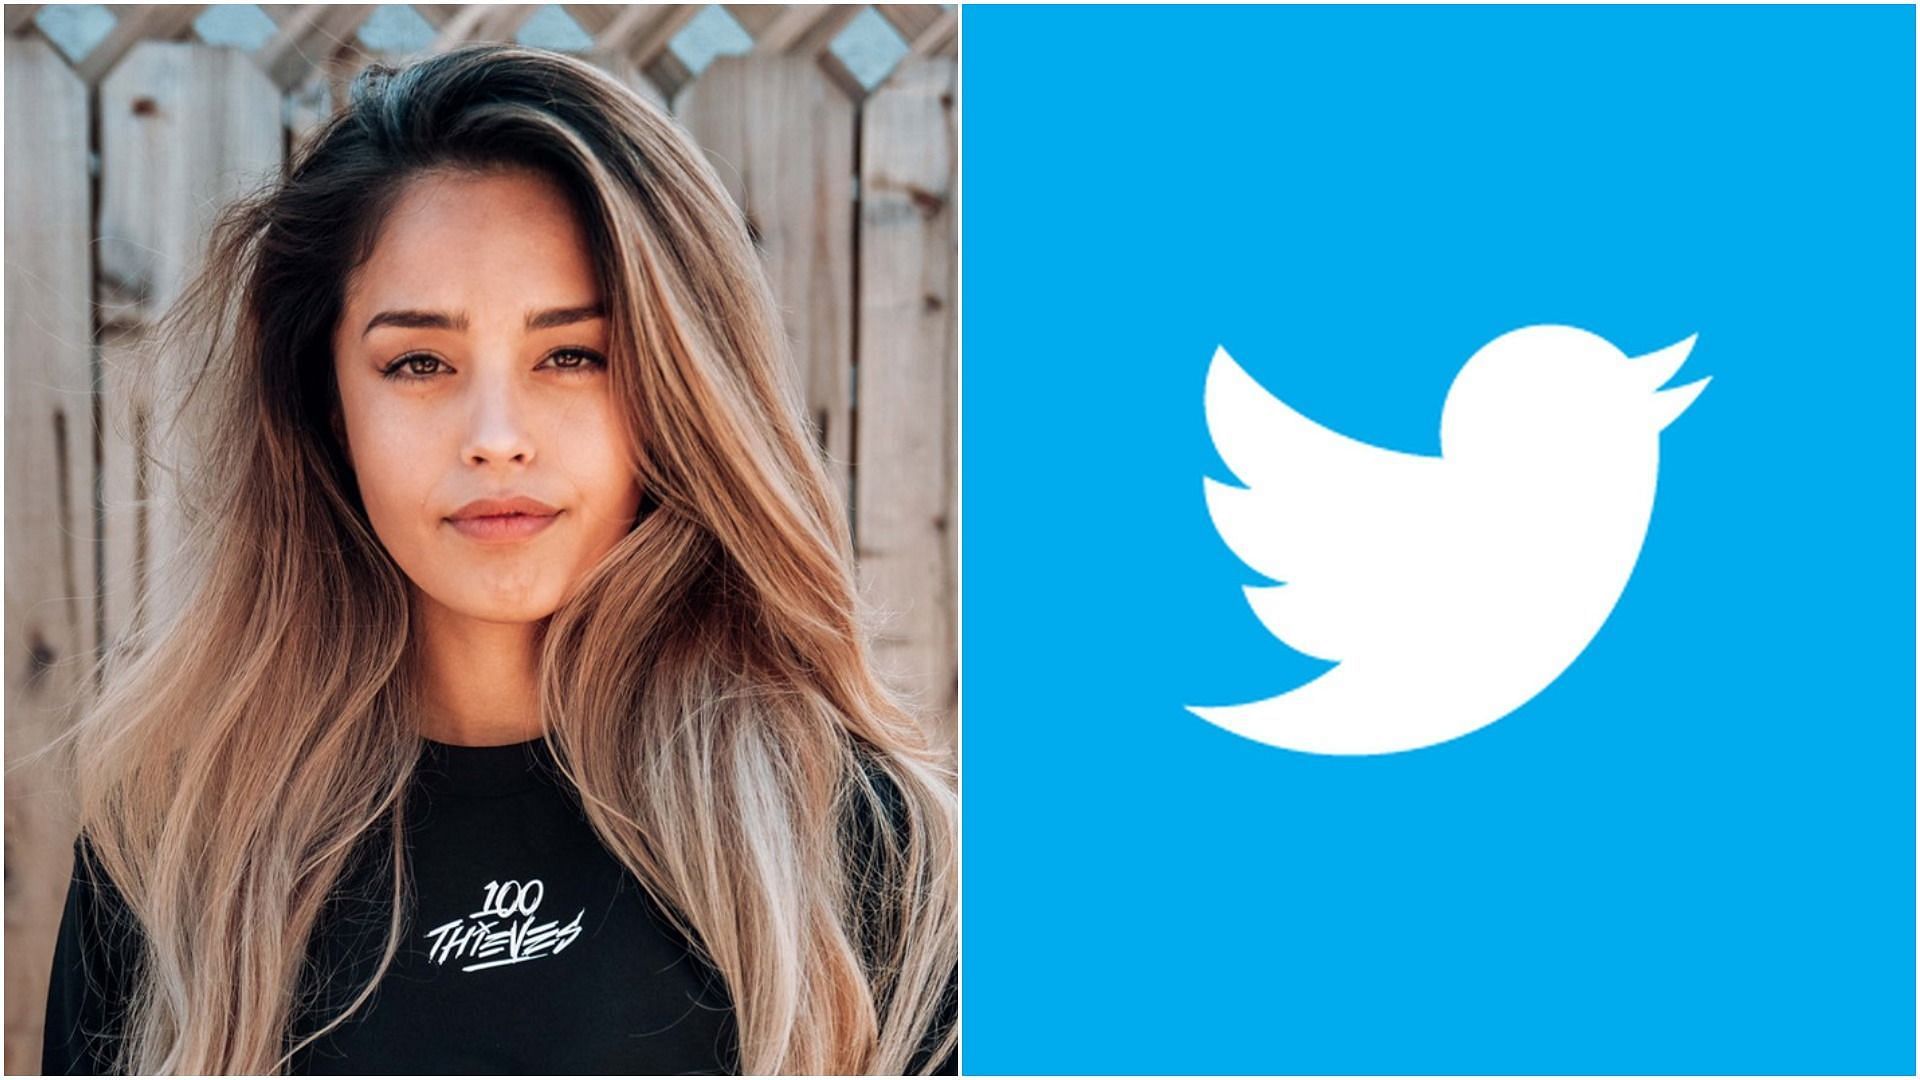 Valkyrae reveals her new roommates on Twitter by sharing a group photo (Image via Sportskeeda)